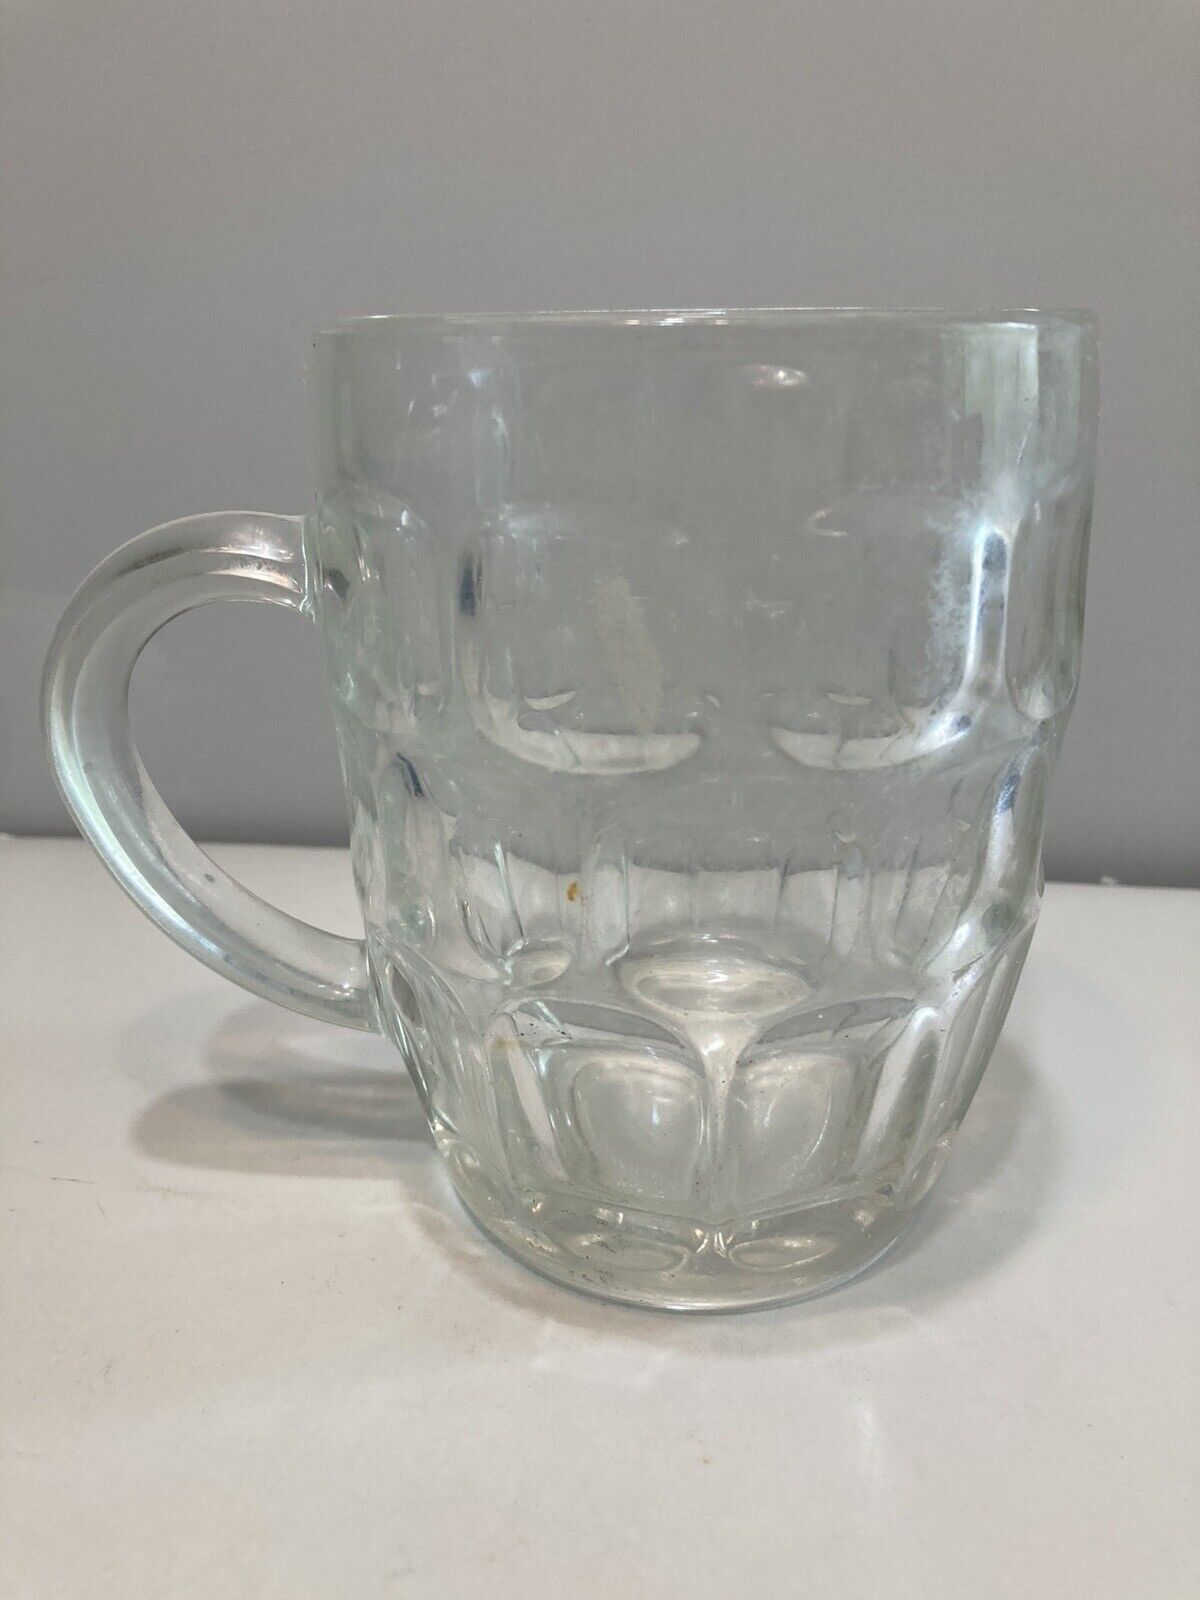 Collectible Vintage Dimple Thumbprint Heavy Clear Glass Pint Beer Mug READ